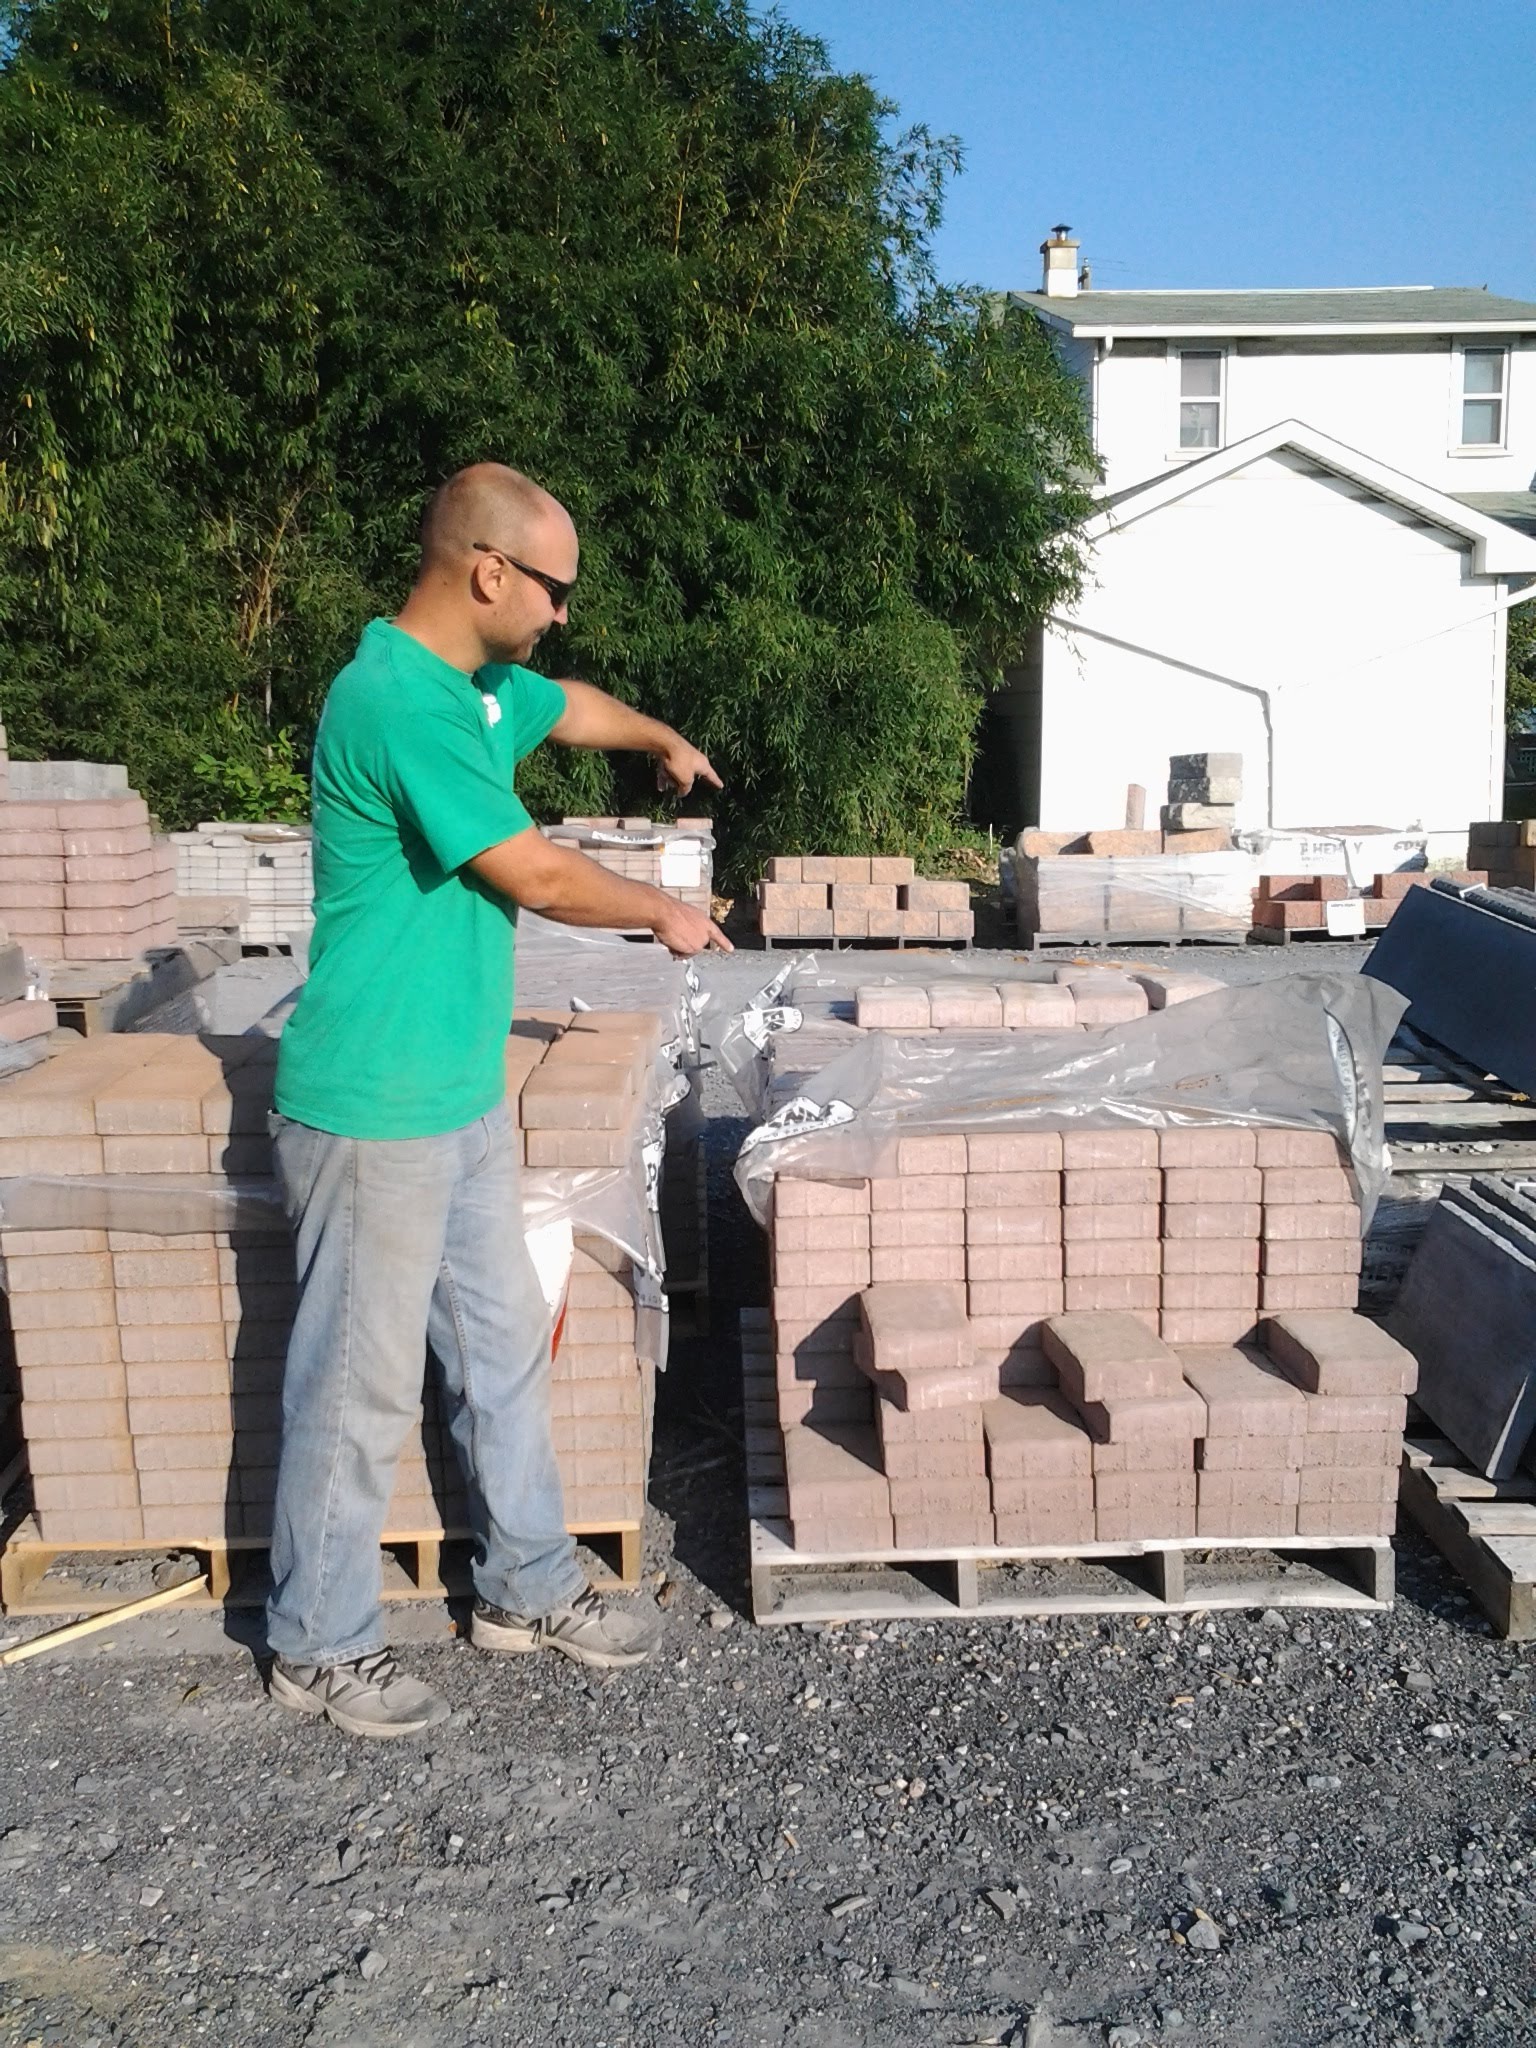 Pavers for Sale